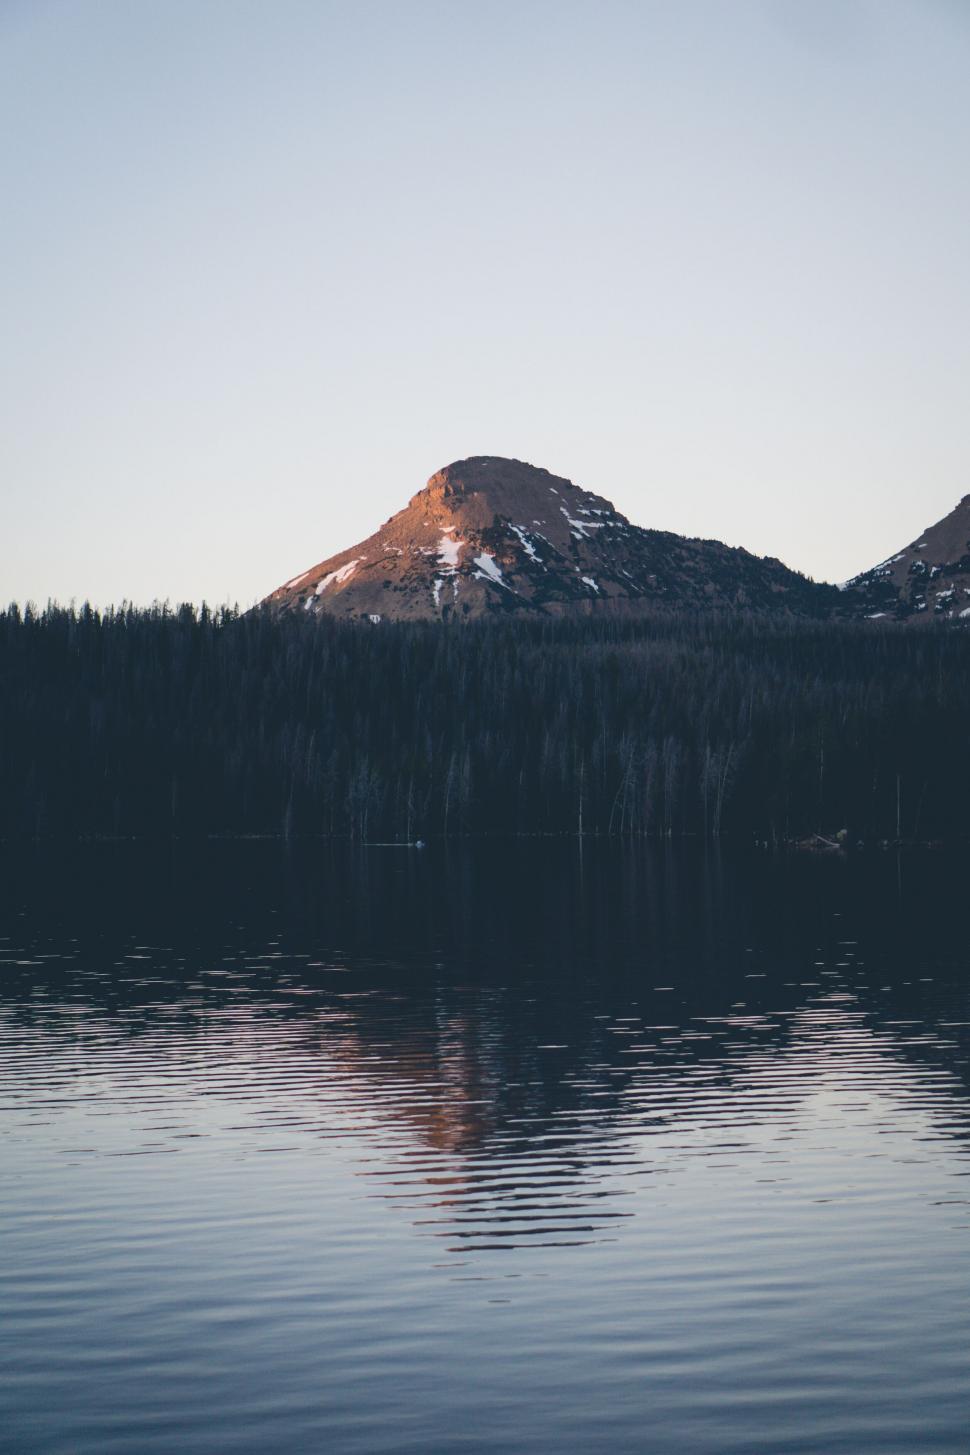 Free Image of Mountain reflected in a still lake 